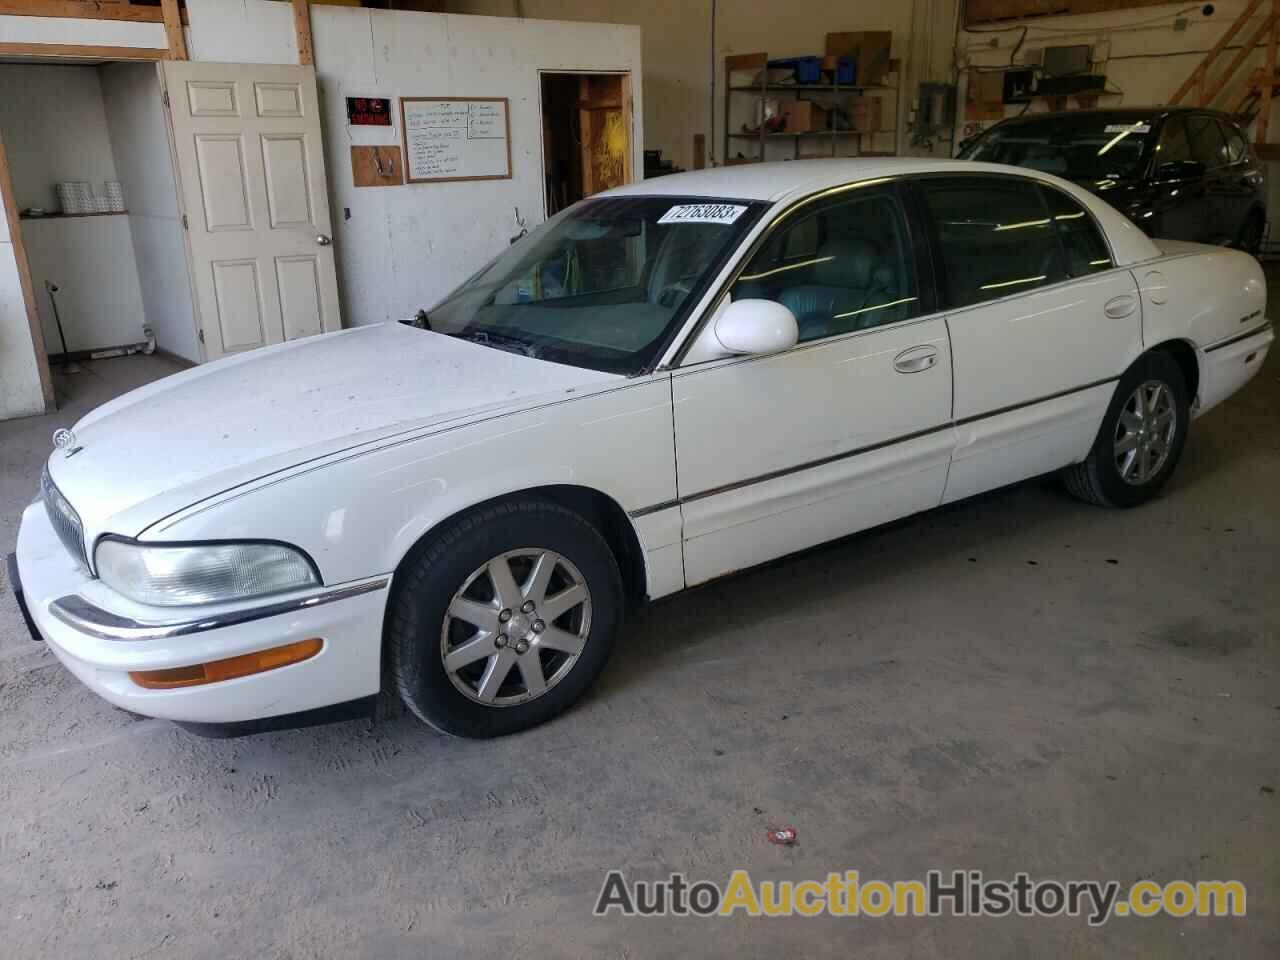 2004 BUICK PARK AVE, 1G4CW54K244138847